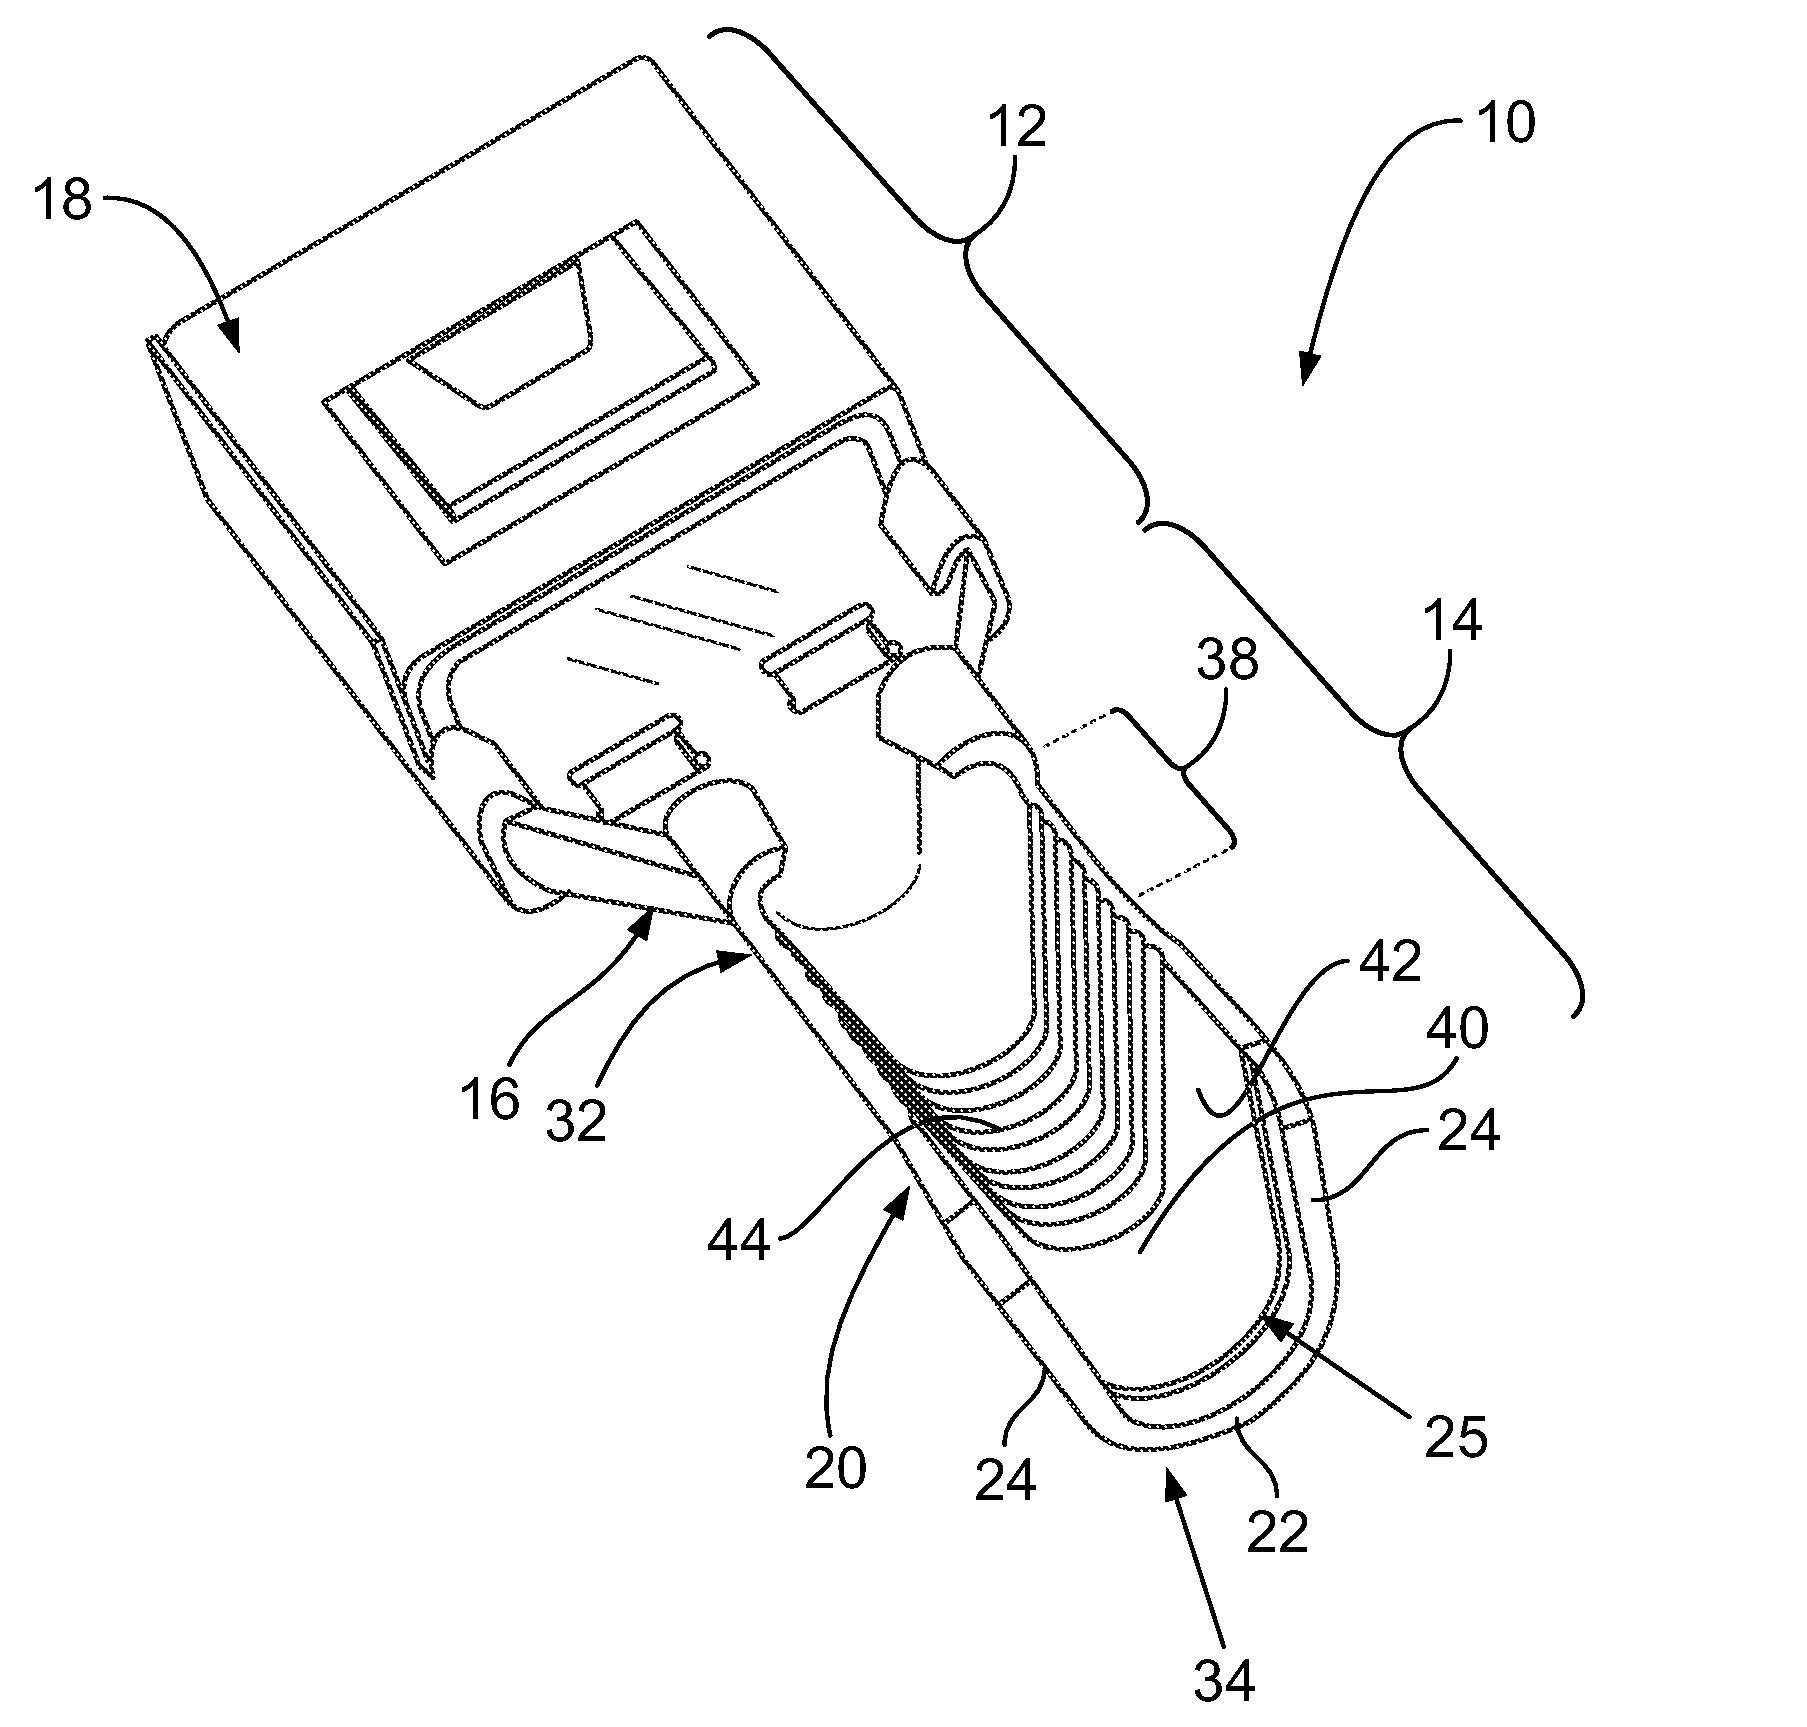 Method and apparatus for crimping an electrical terminal to an electrical wire